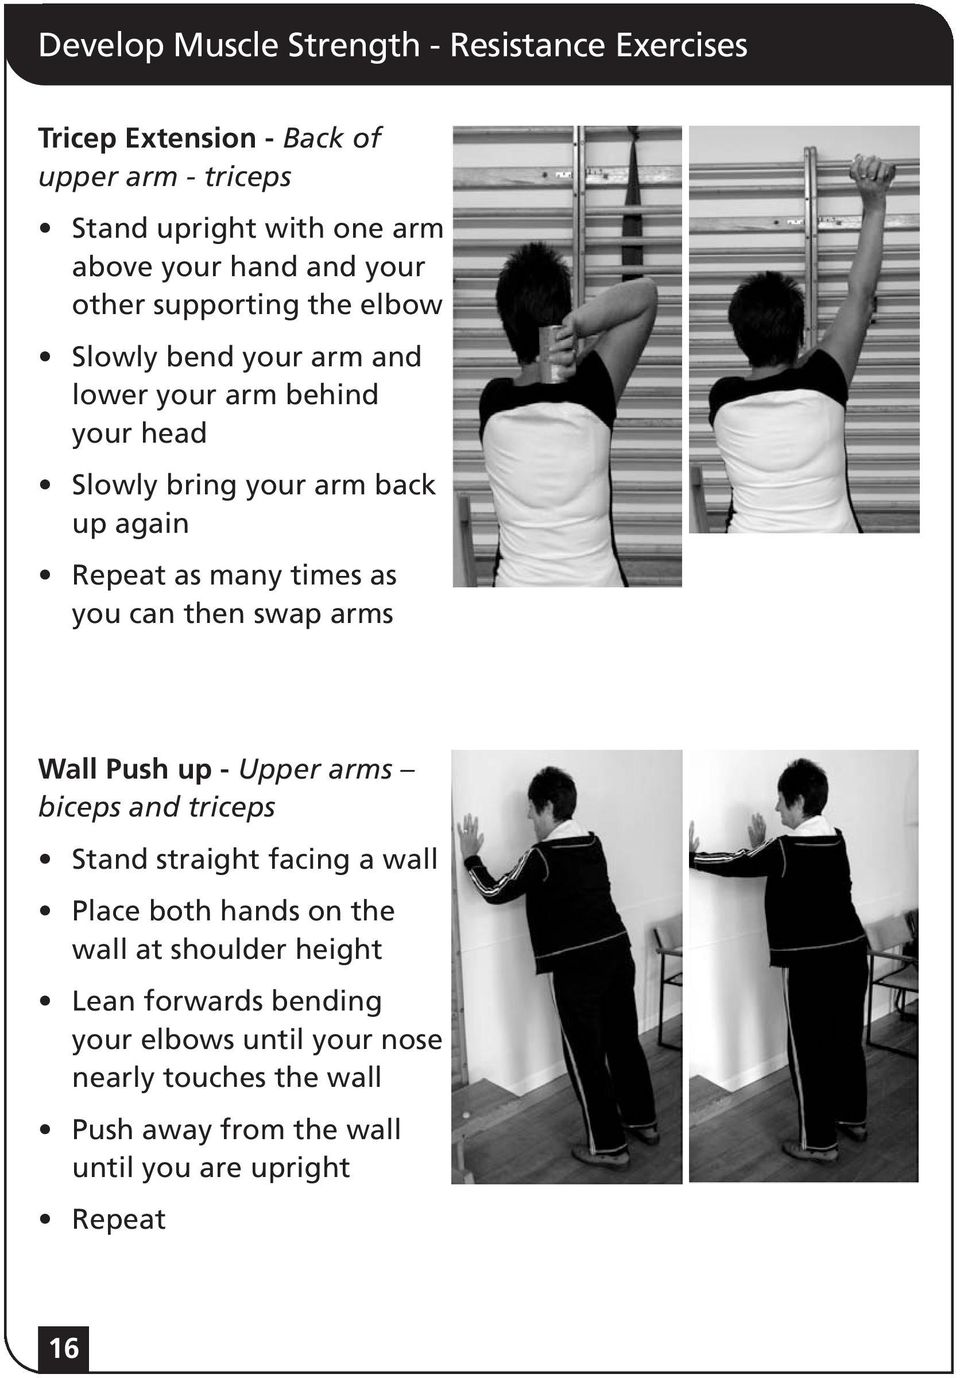 times as you can then swap arms Wall Push up - Upper arms biceps and triceps Stand straight facing a wall Place both hands on the wall at